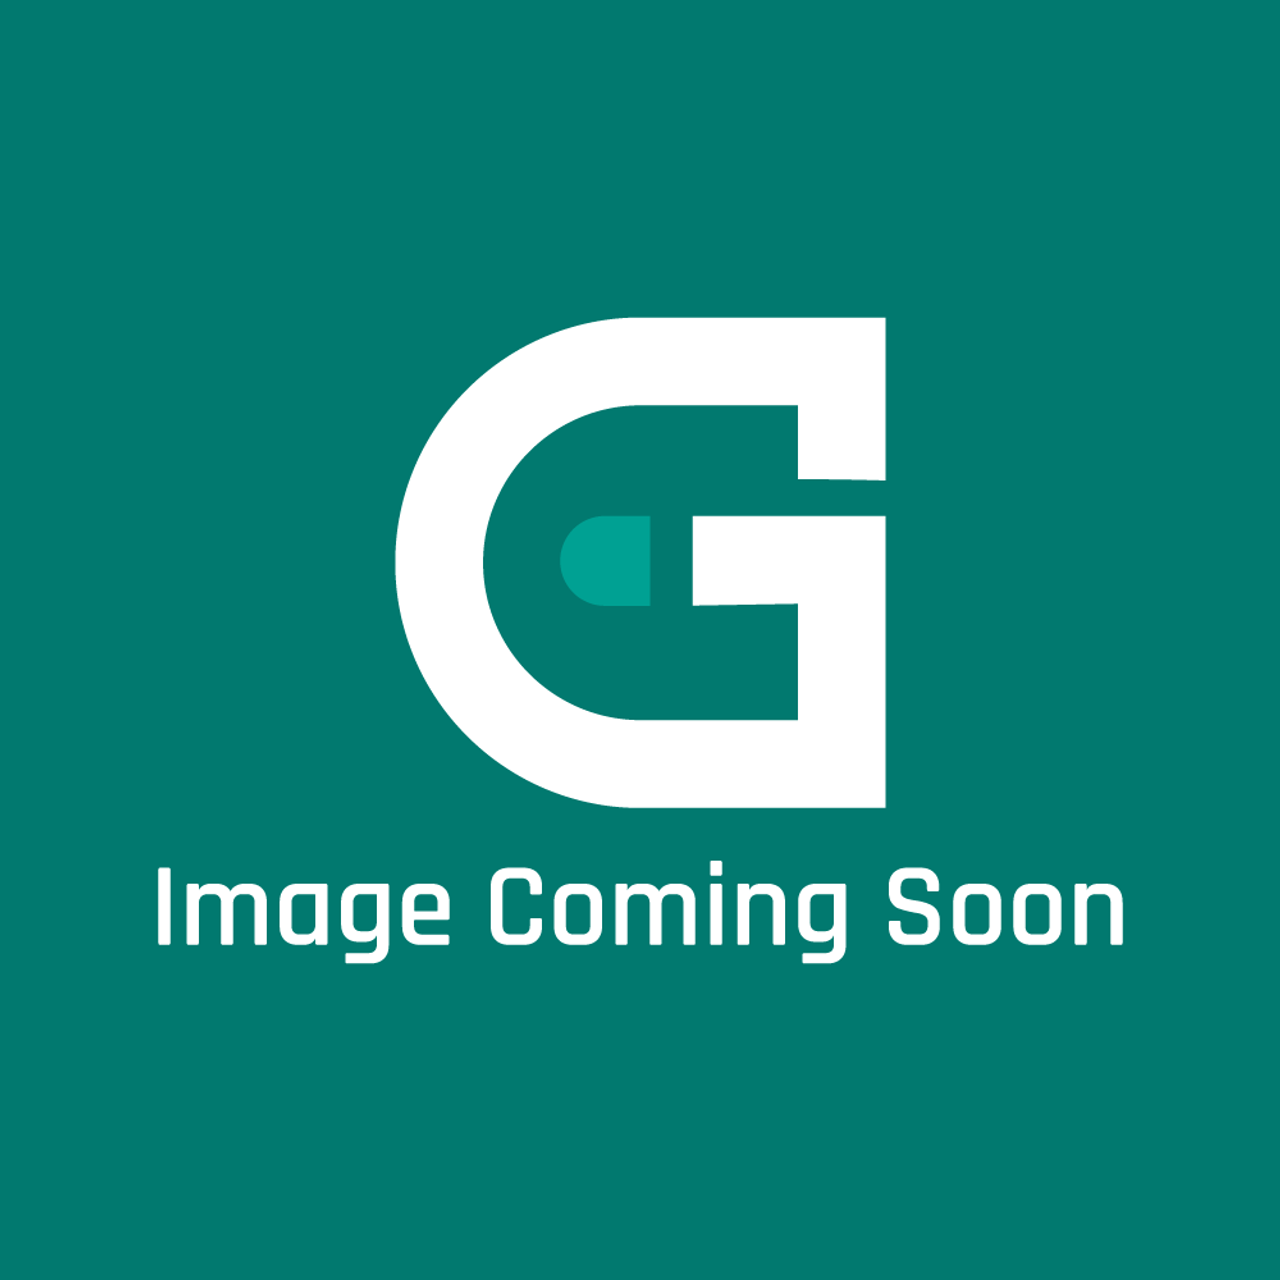 GE Appliances WB32X32079 - 11" Precision Cooking Pan - Image Coming Soon!